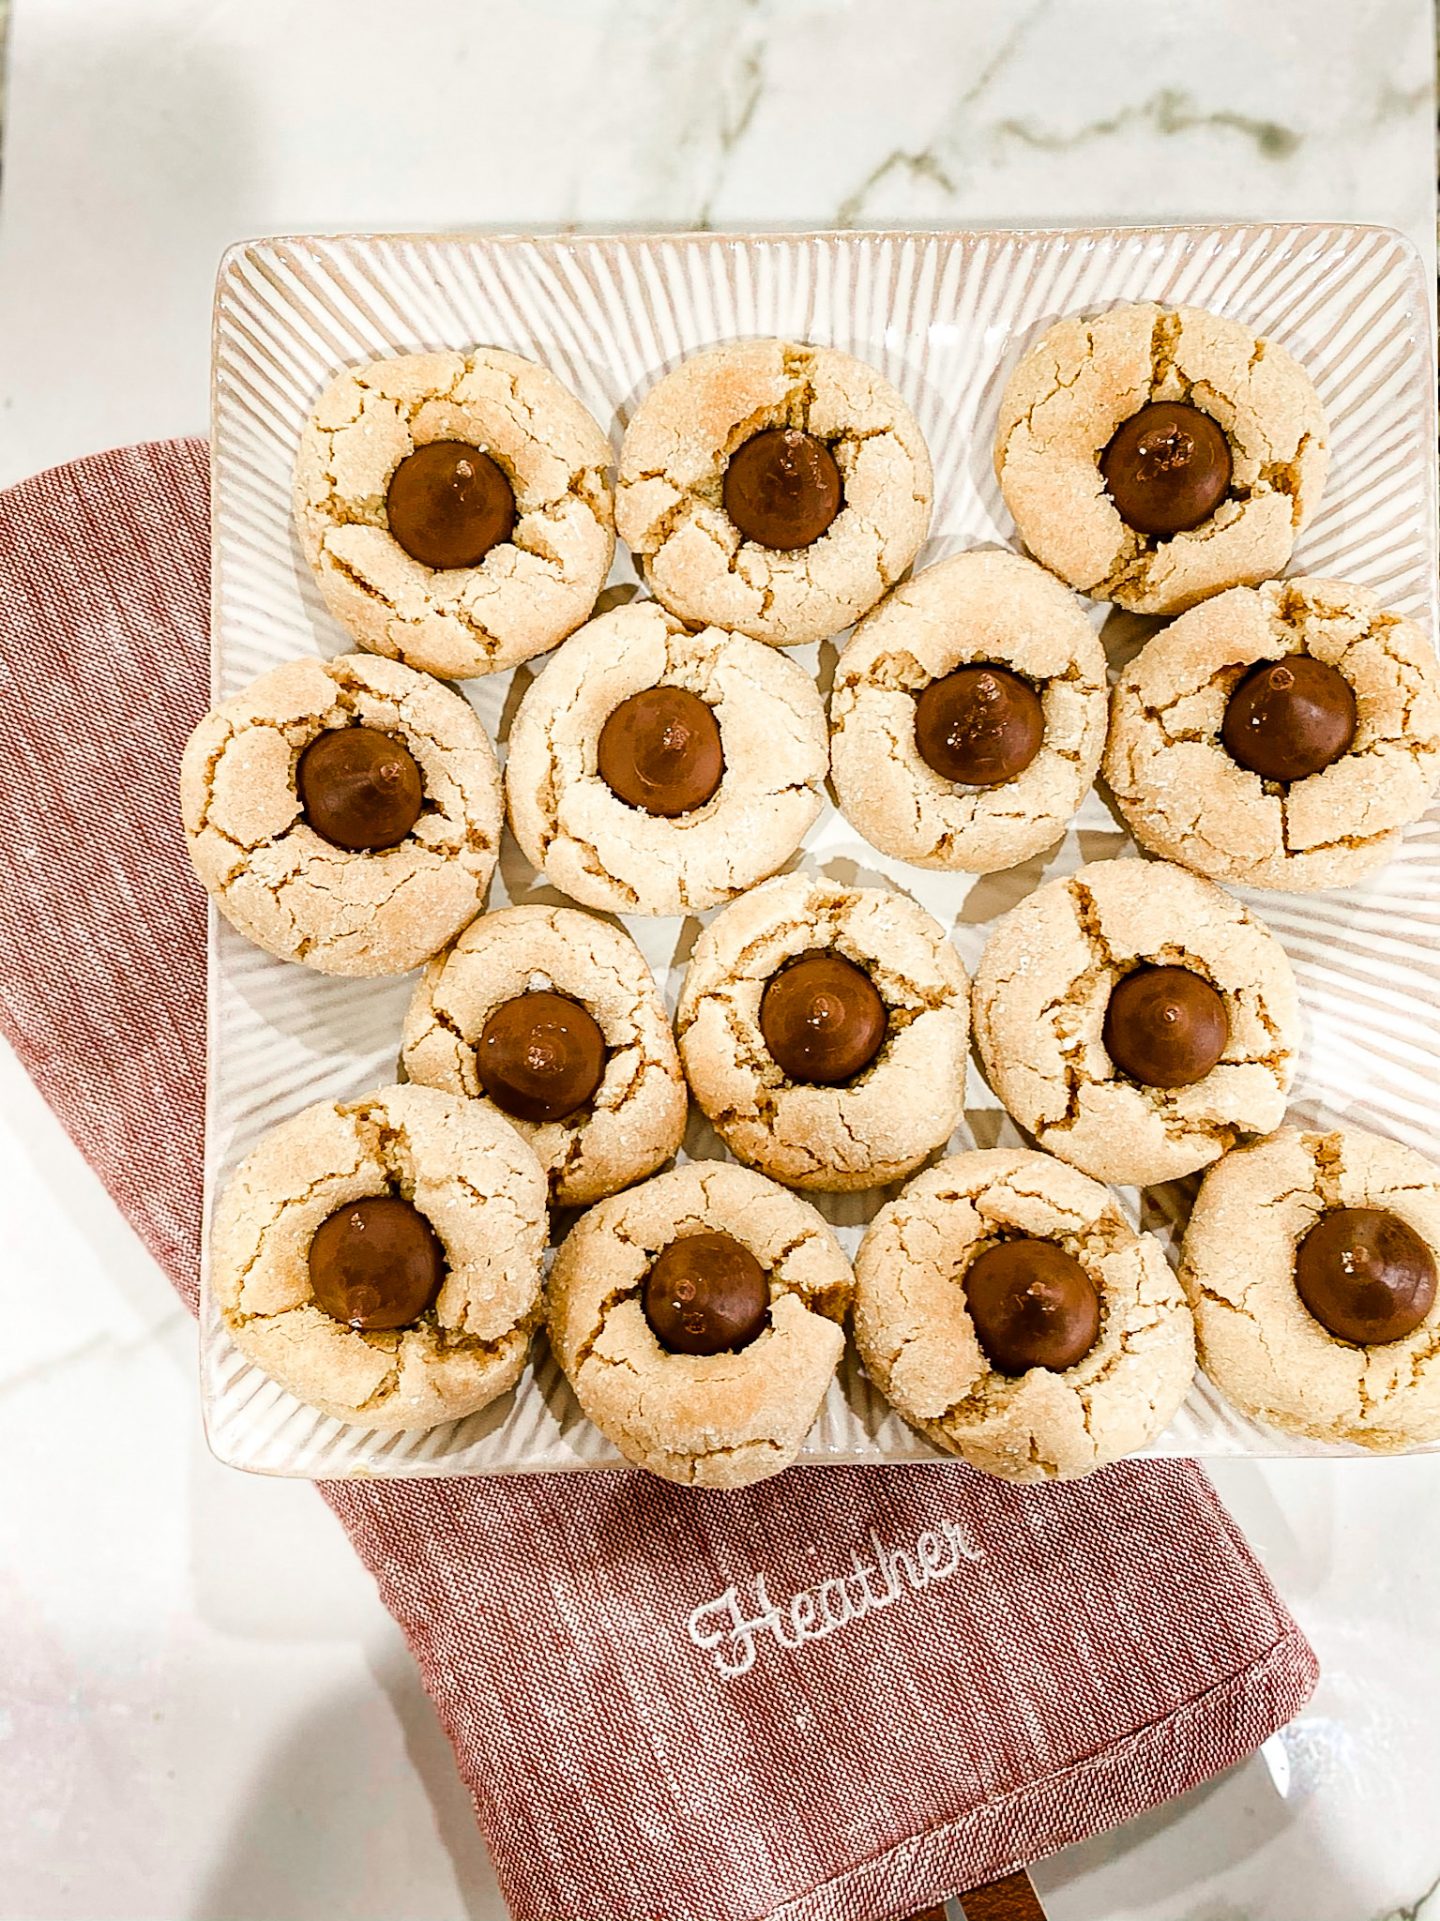 Peanut Butter Blossoms by Alabama Family + Food blogger, Heather Brown // My Life Well Loved